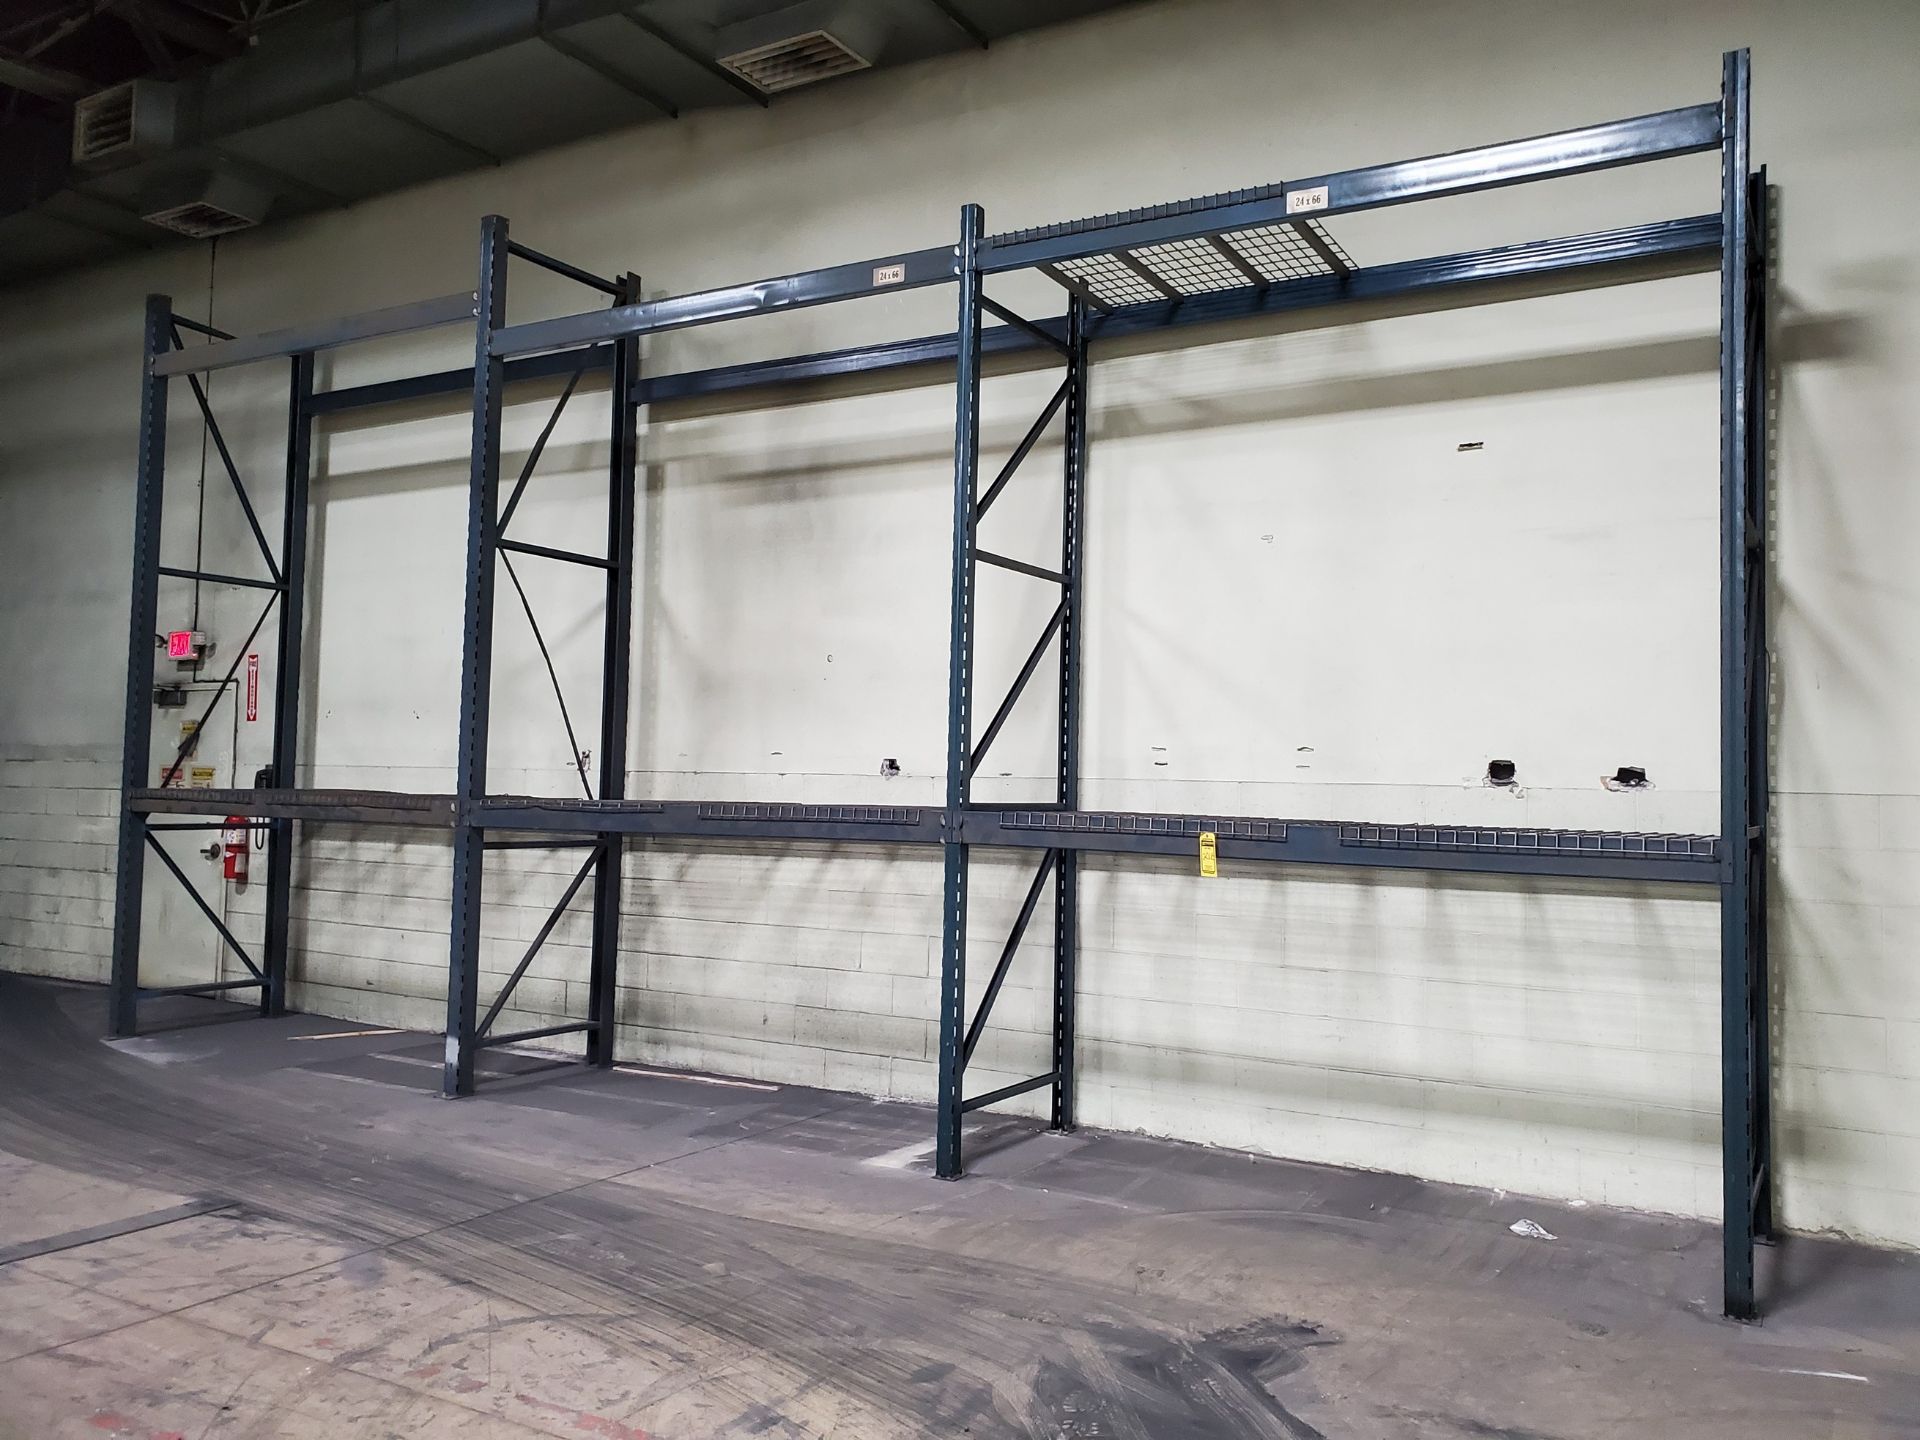 (5) SECTIONS OF SLOT/CORNER LOCK PALLET RACKING - VARIOUS SIZE HEIGHTS (8'-16') AND BEAMS (9'-12') - - Image 6 of 7